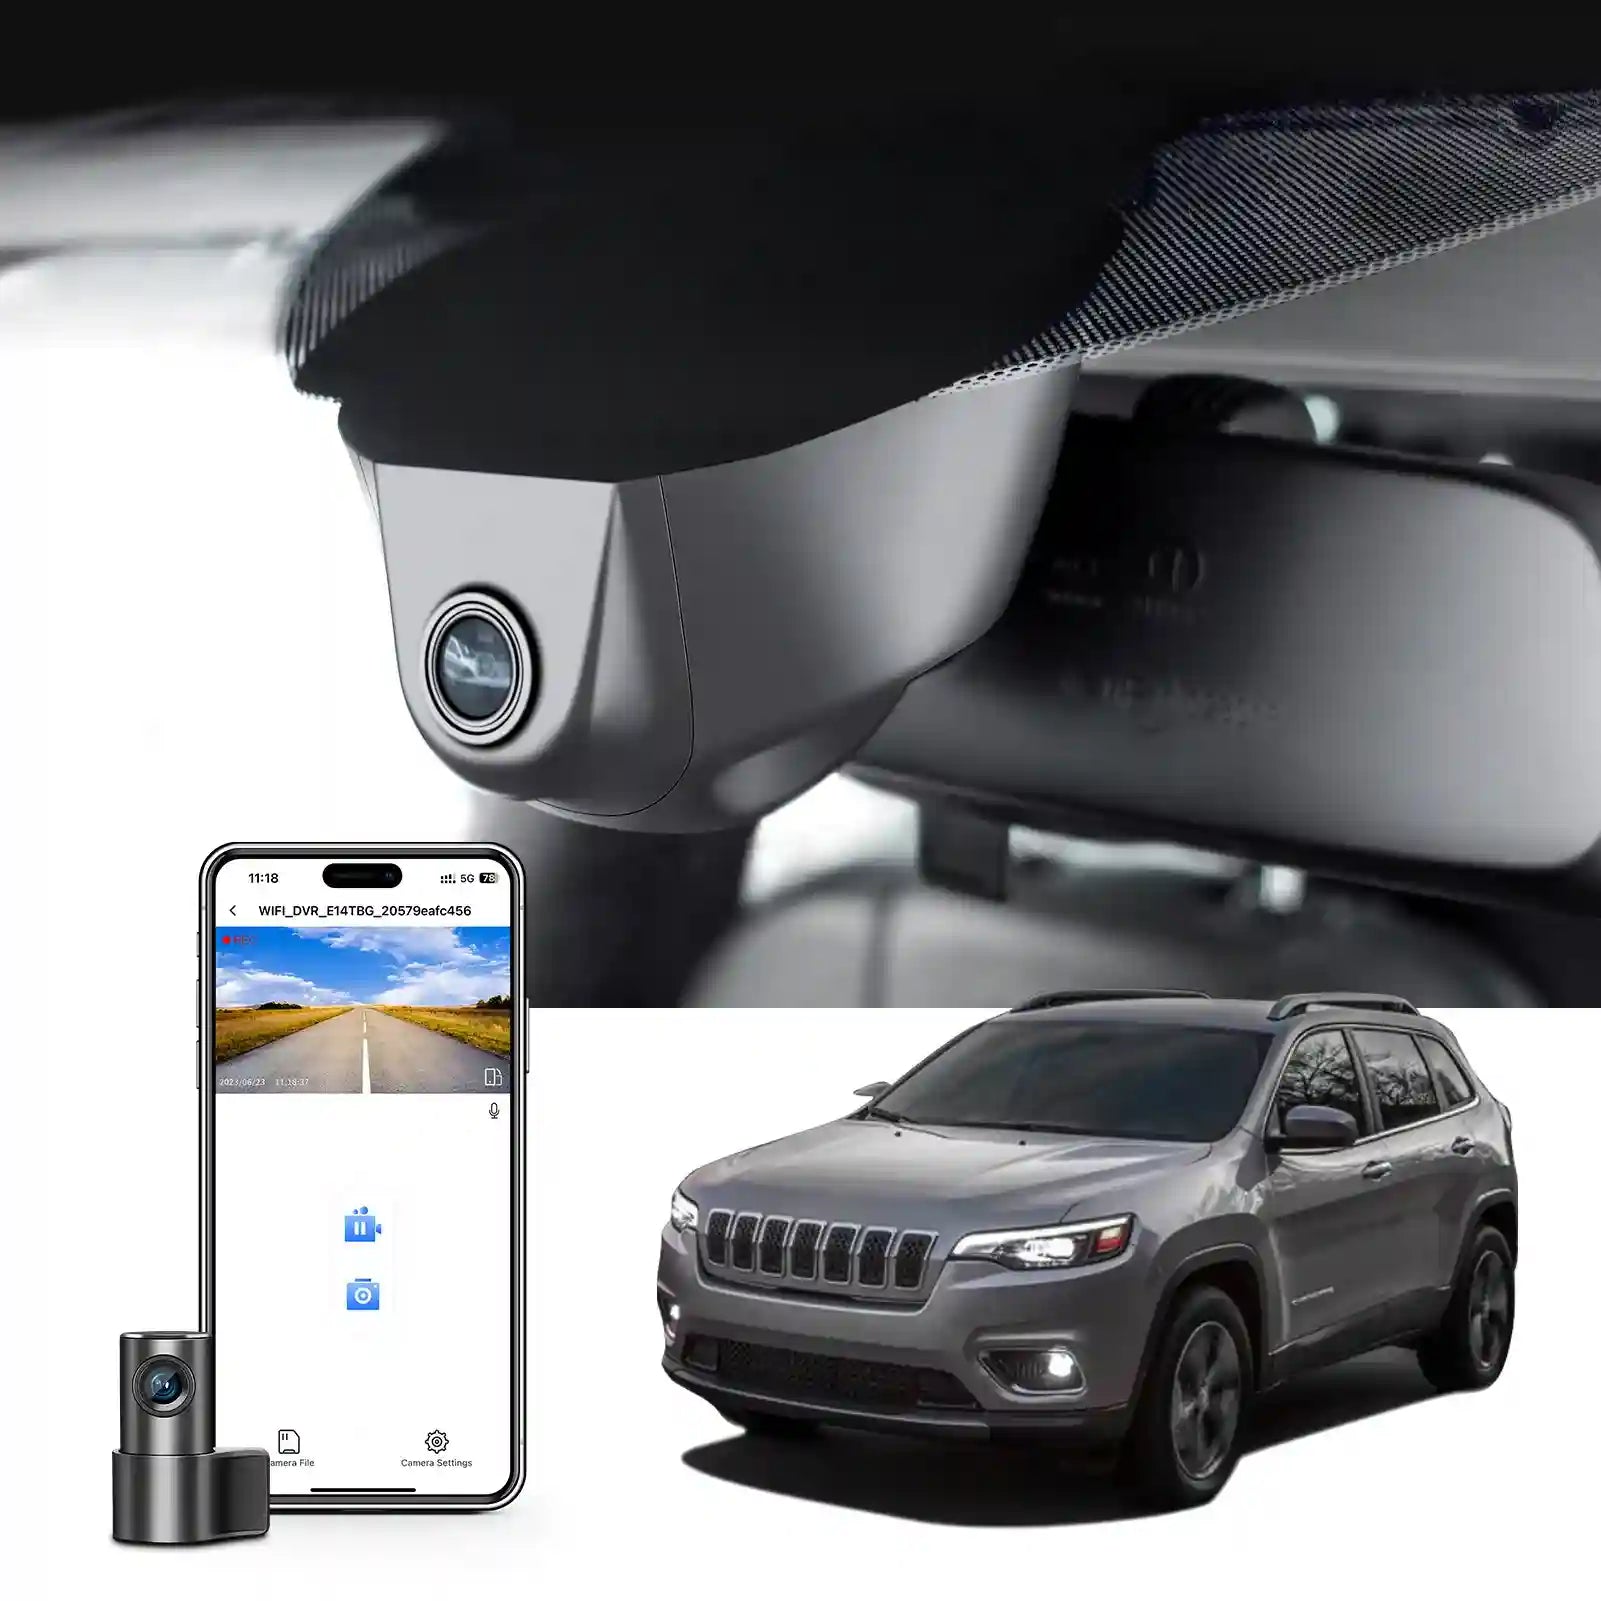 Mangoal Front 4K & Rear 1080P Dash Cam Fit for Jeep 5th Gen Cherokee 2014-2018 KL (Model A), Latitude Altitude Limited, Integrated OEM Look, UHD 2160P Video, Built-in WiFi, Free App and 128GB Card